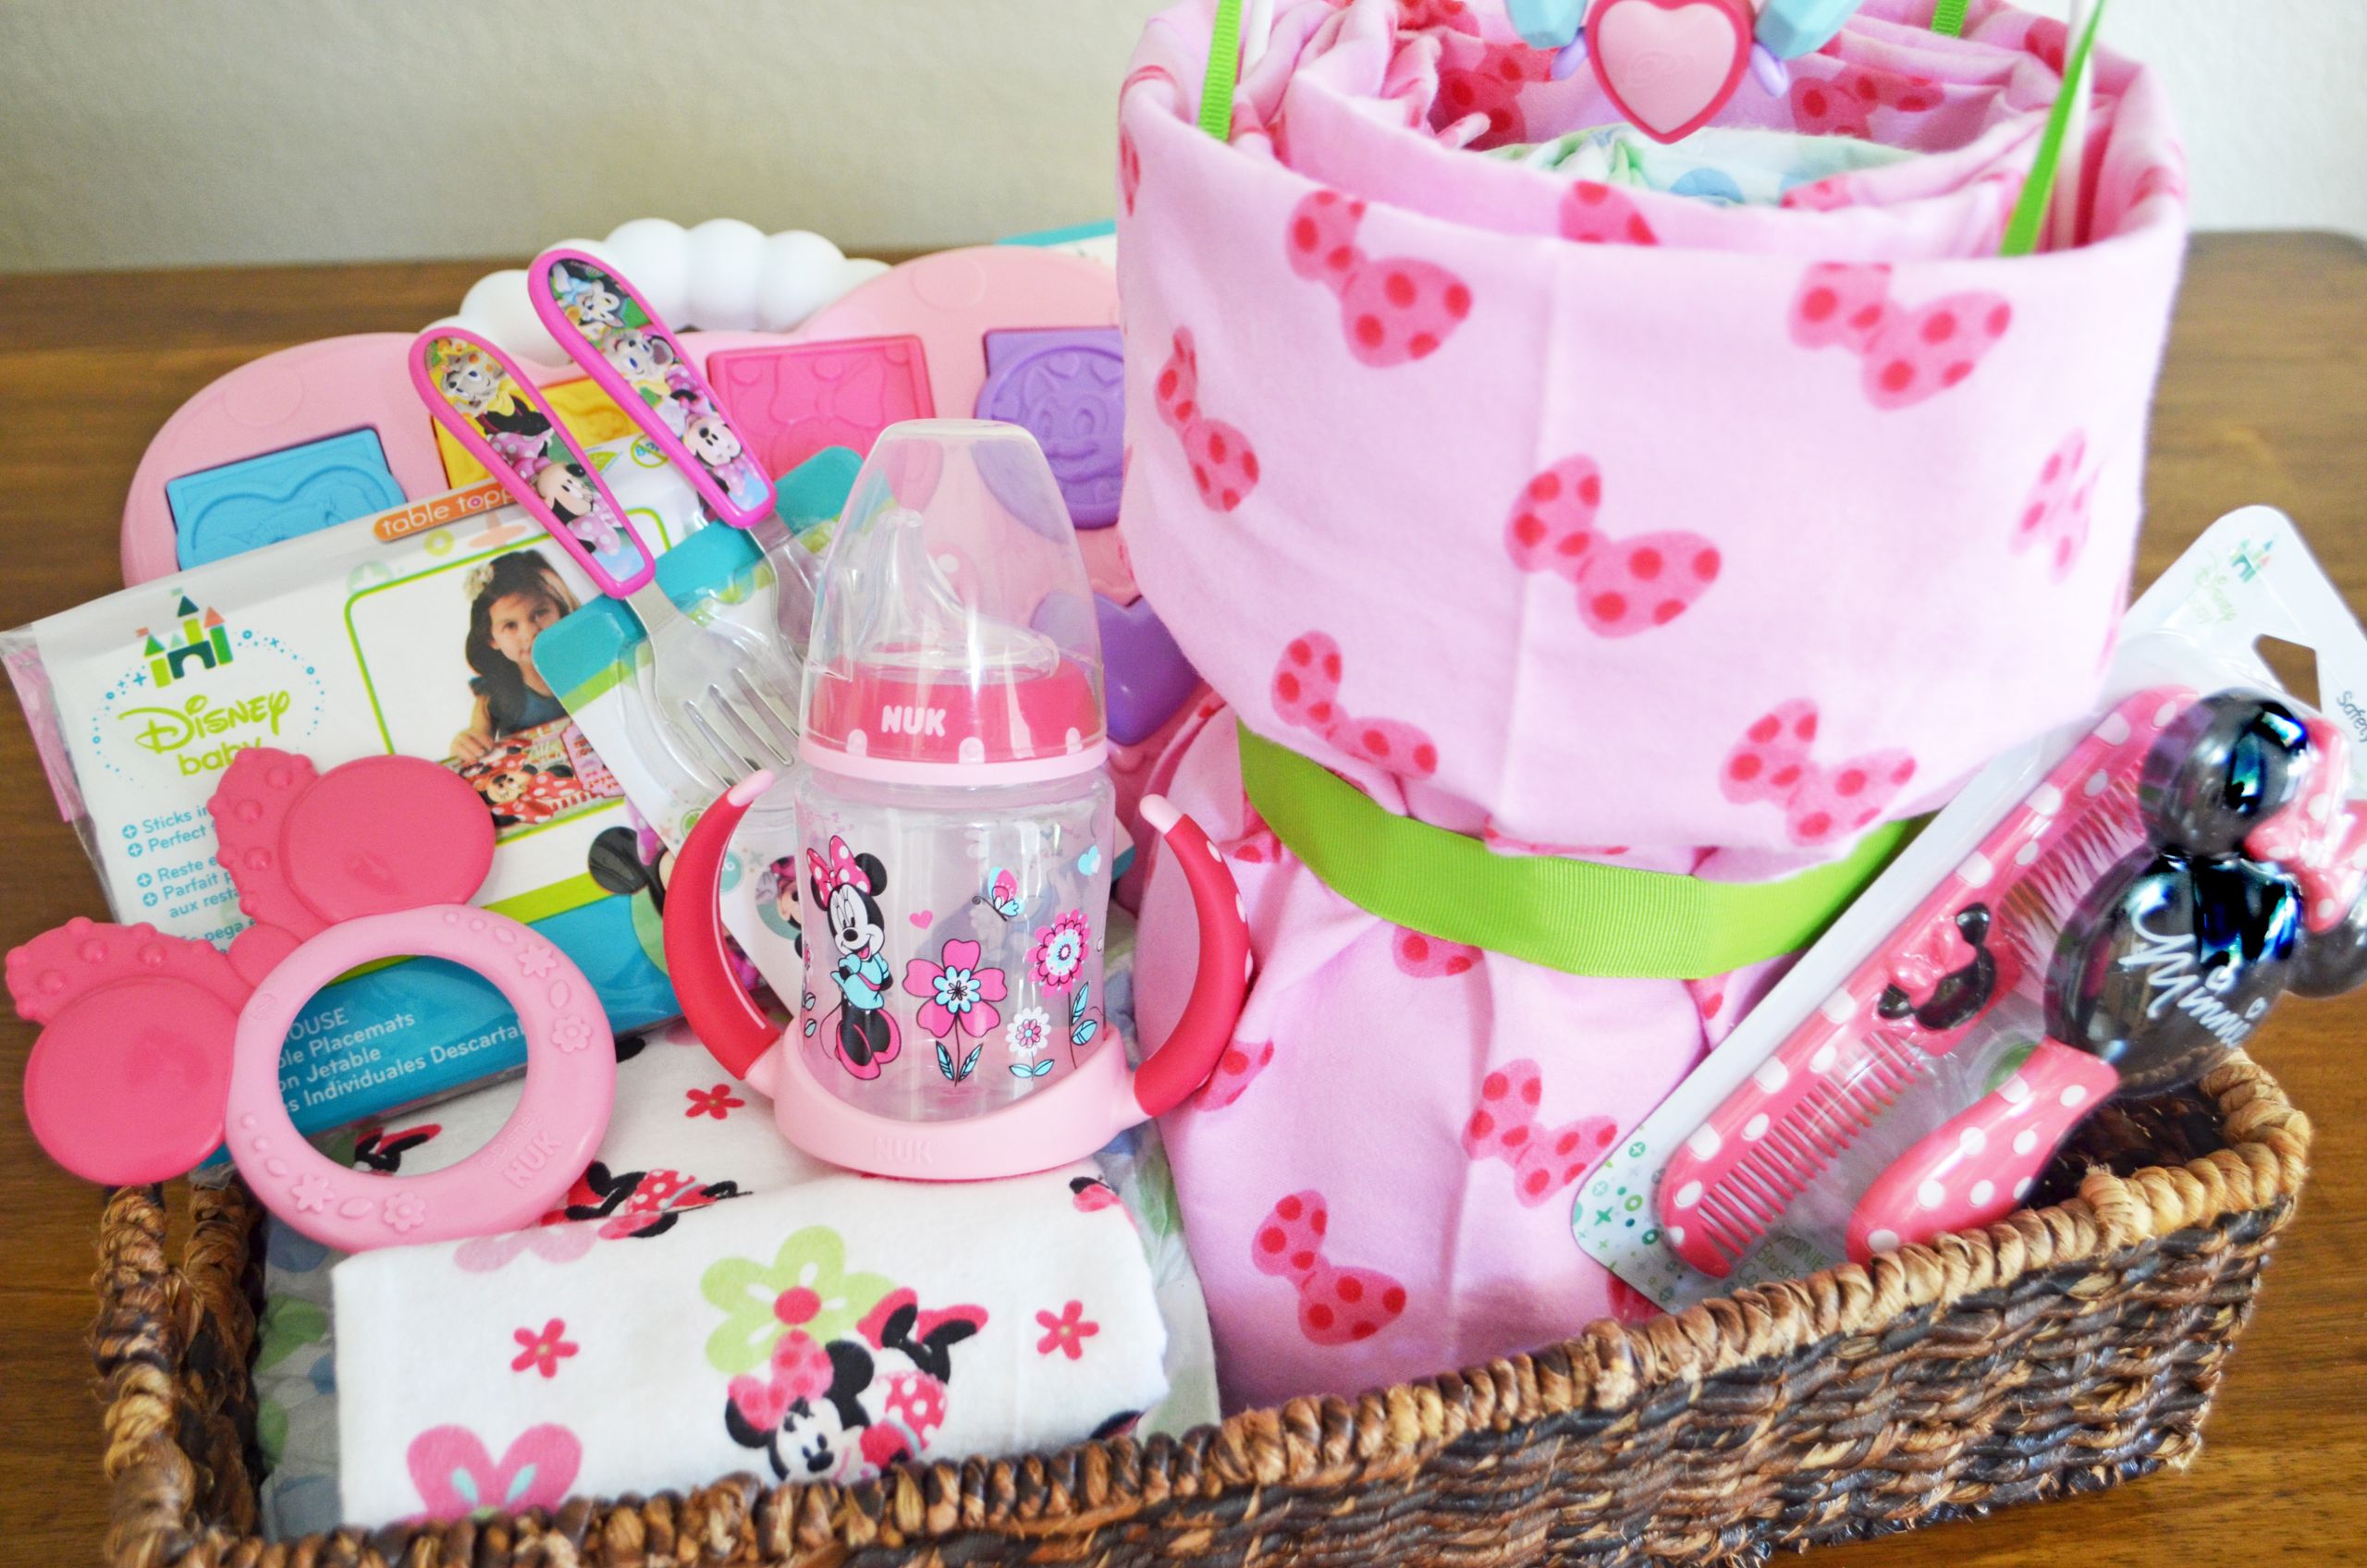 Baby Girl Gifts For Baby Shower
 Princess Diaper Cake Creating the Perfect Disney Baby